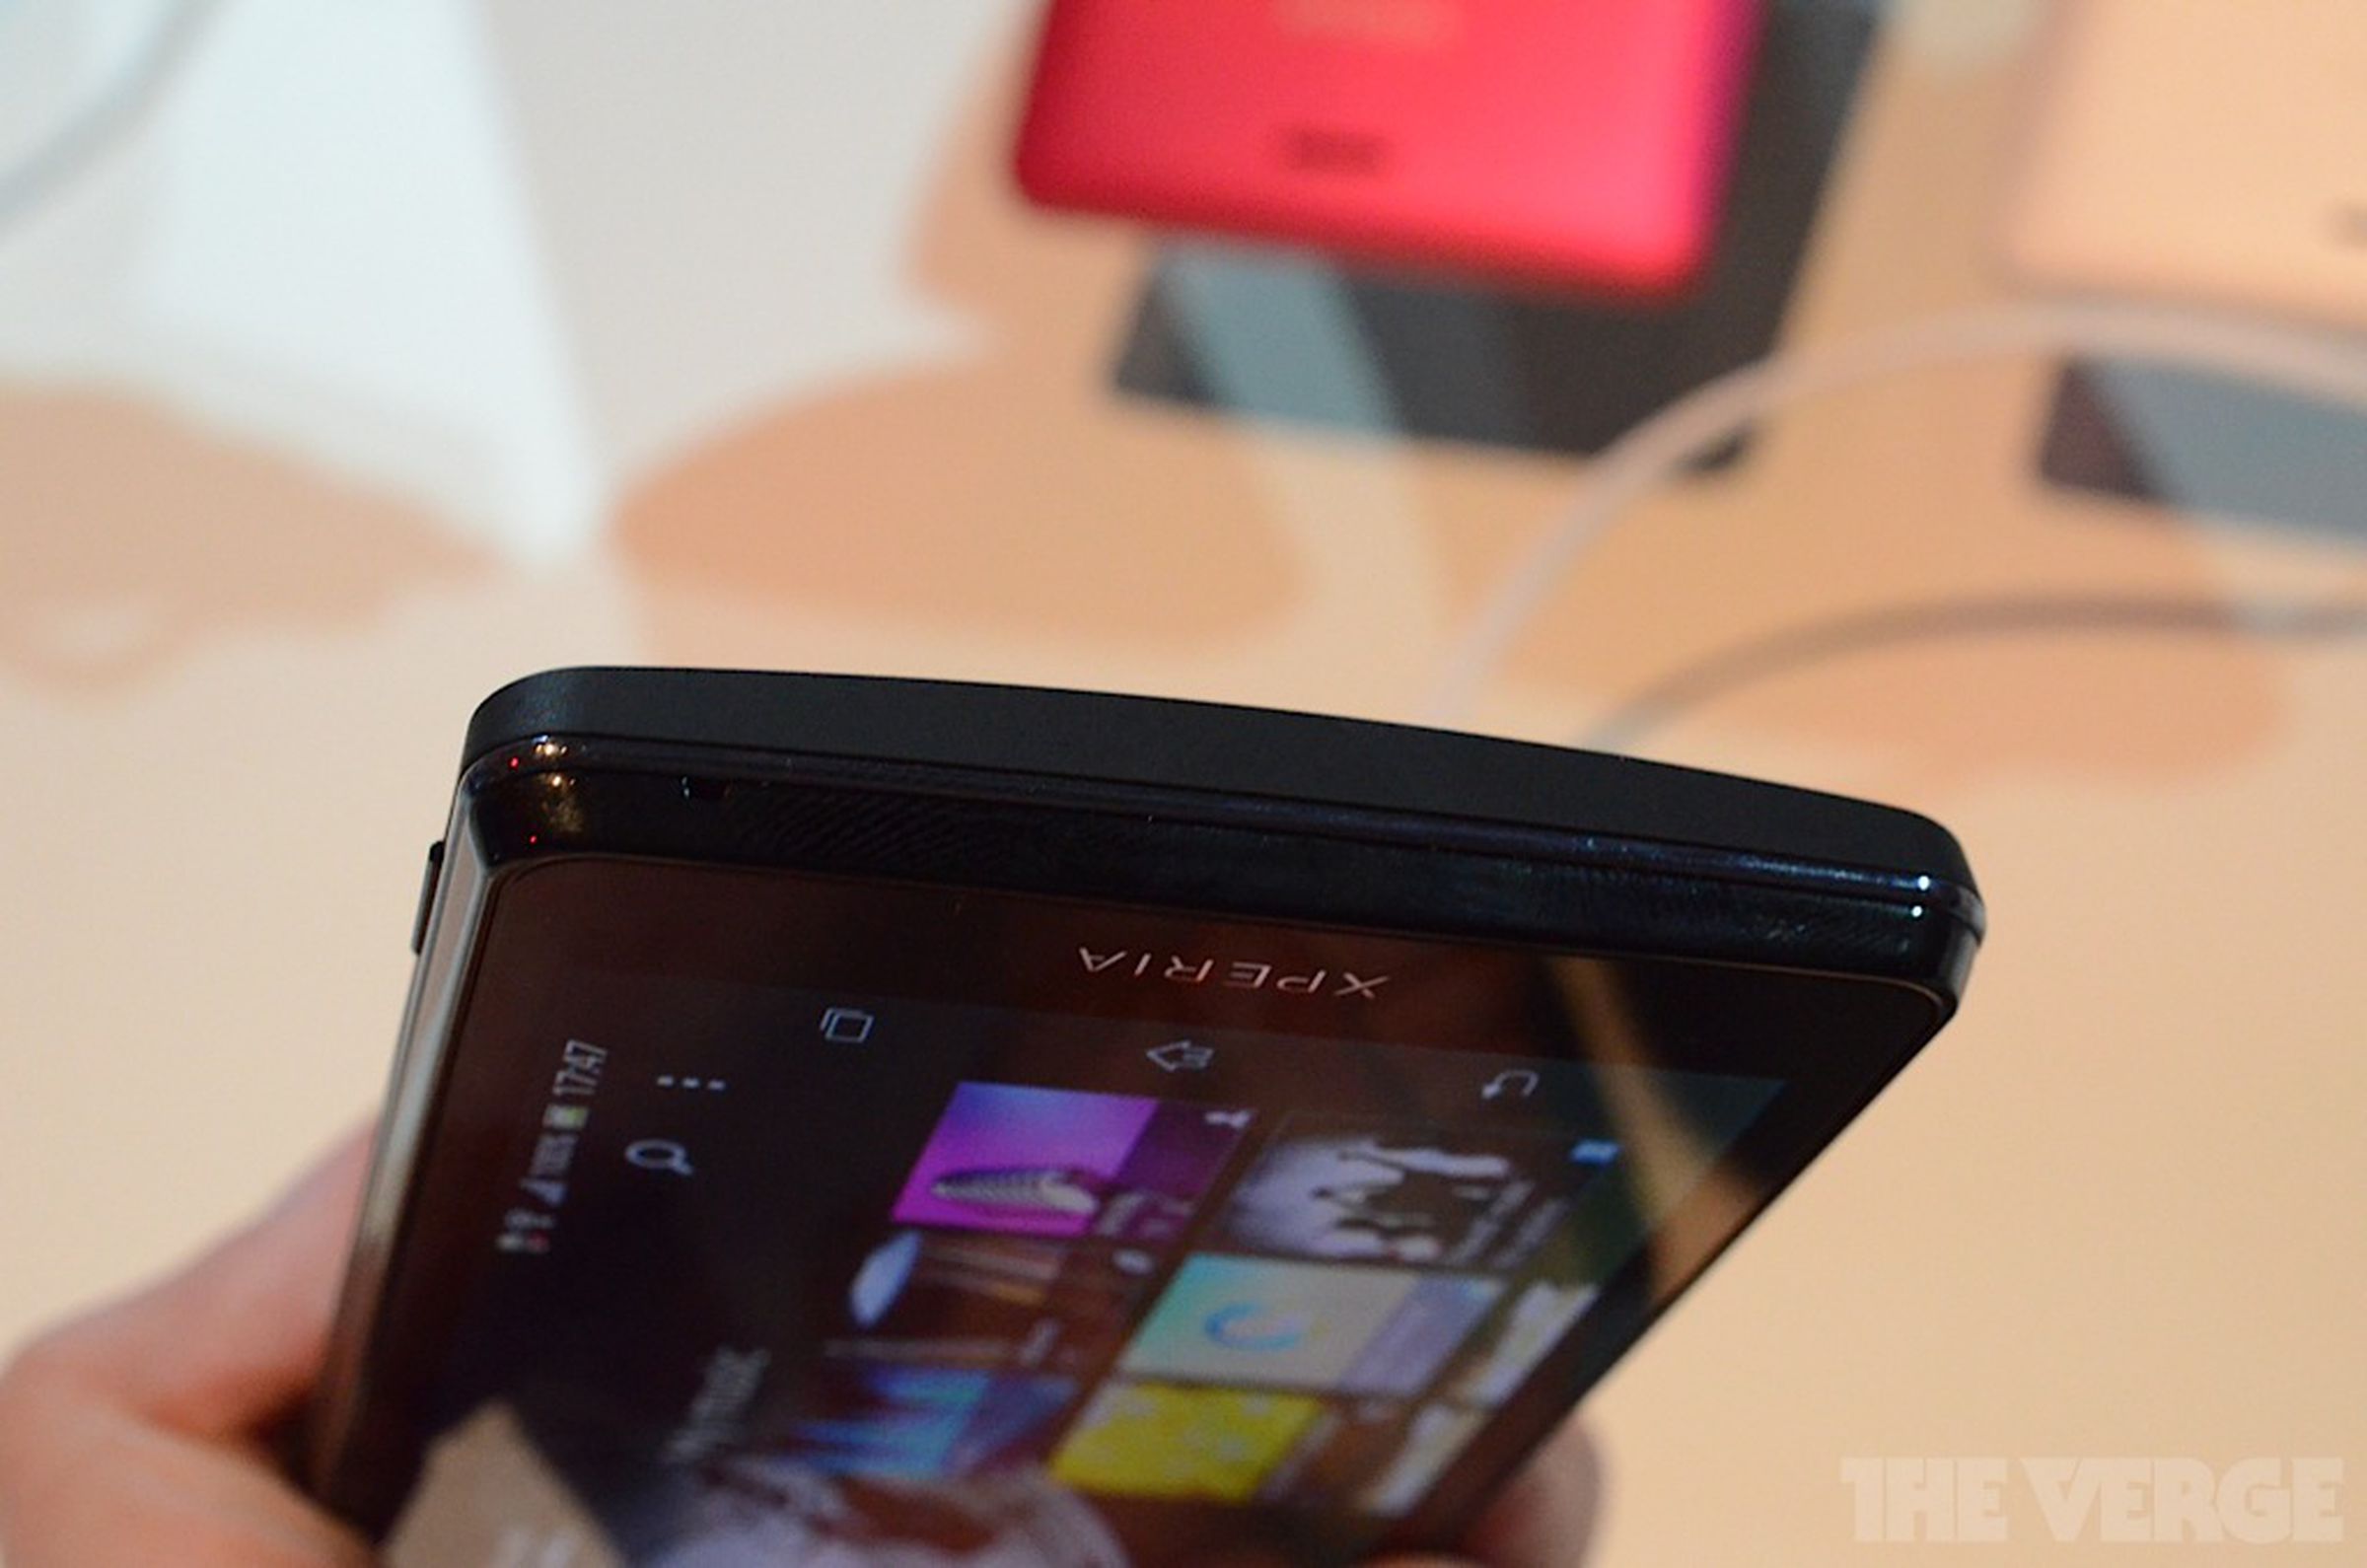 Sony Xperia T / TX hands-on pictures